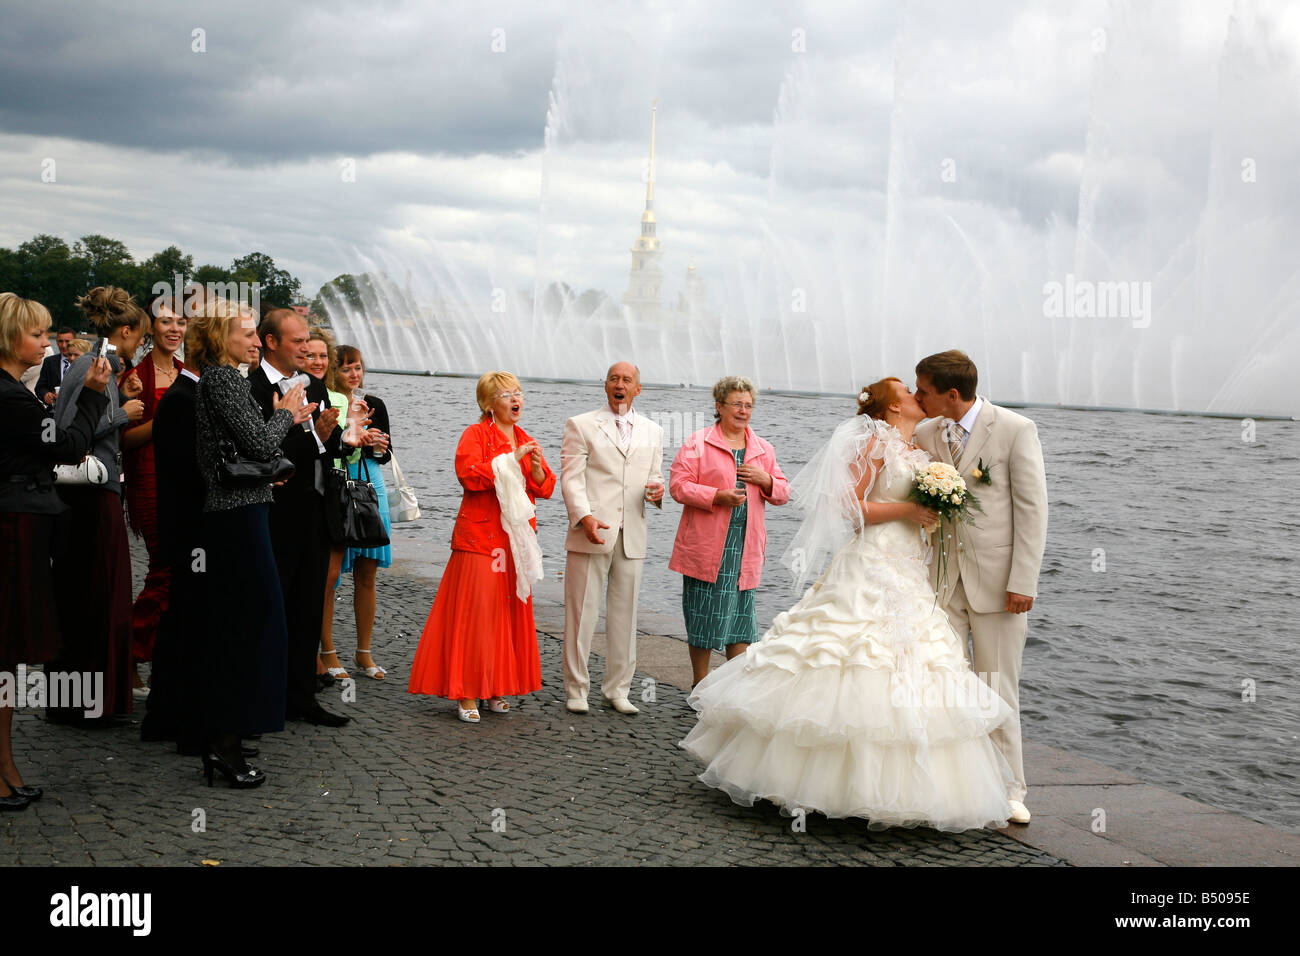 Aug 2008 - Newly married couple celebrates at Vasilevskiy island by the Neva river St Petersburg Russia Stock Photo